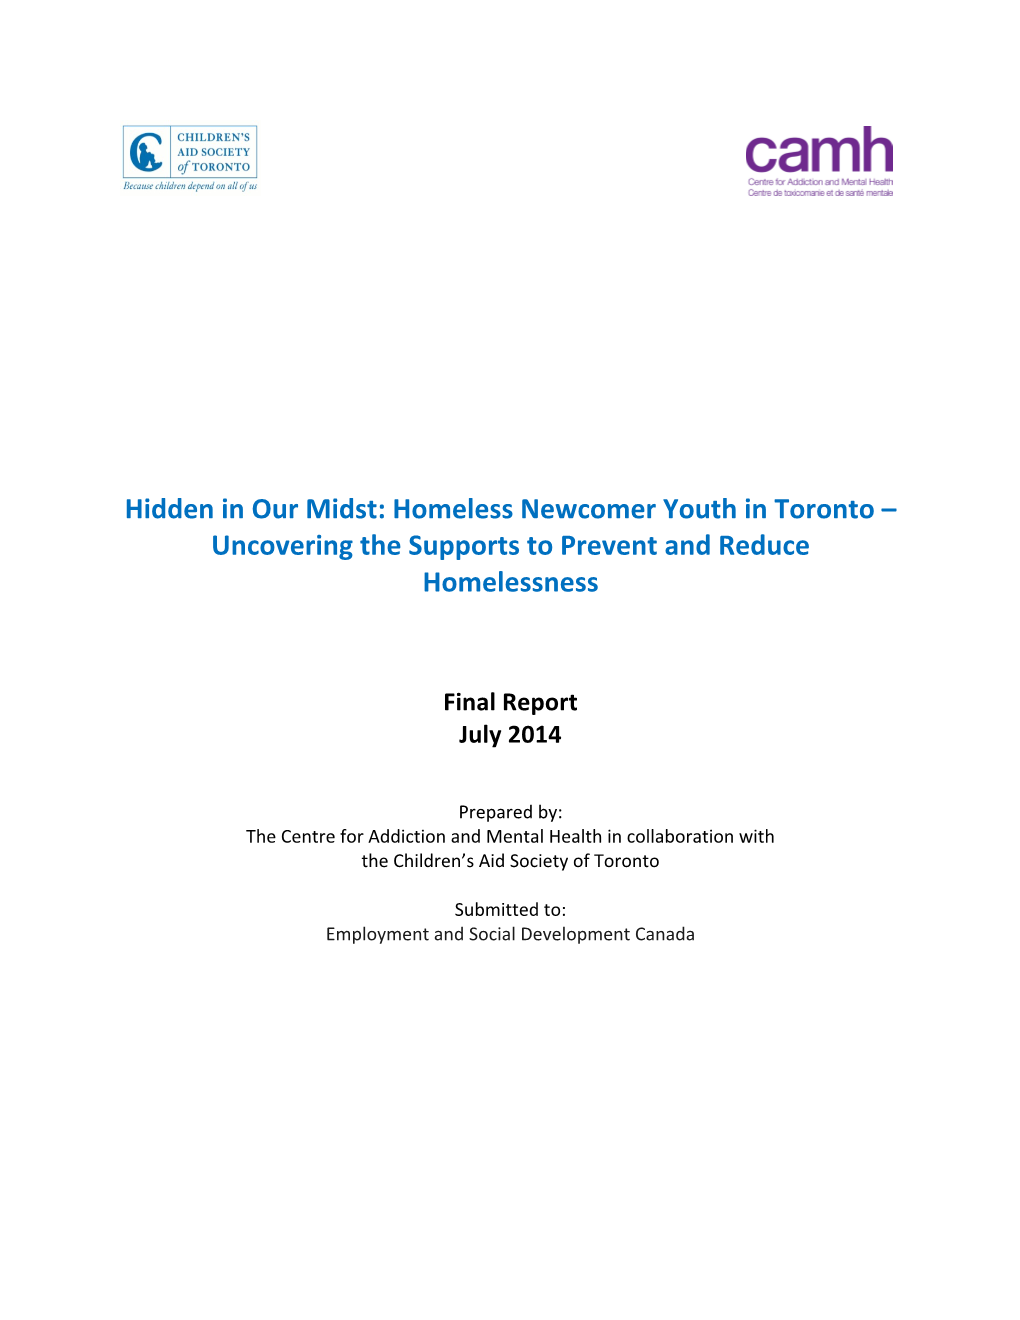 Hidden in Our Midst: Homeless Newcomer Youth in Toronto – Uncovering the Supports to Prevent and Reduce Homelessness